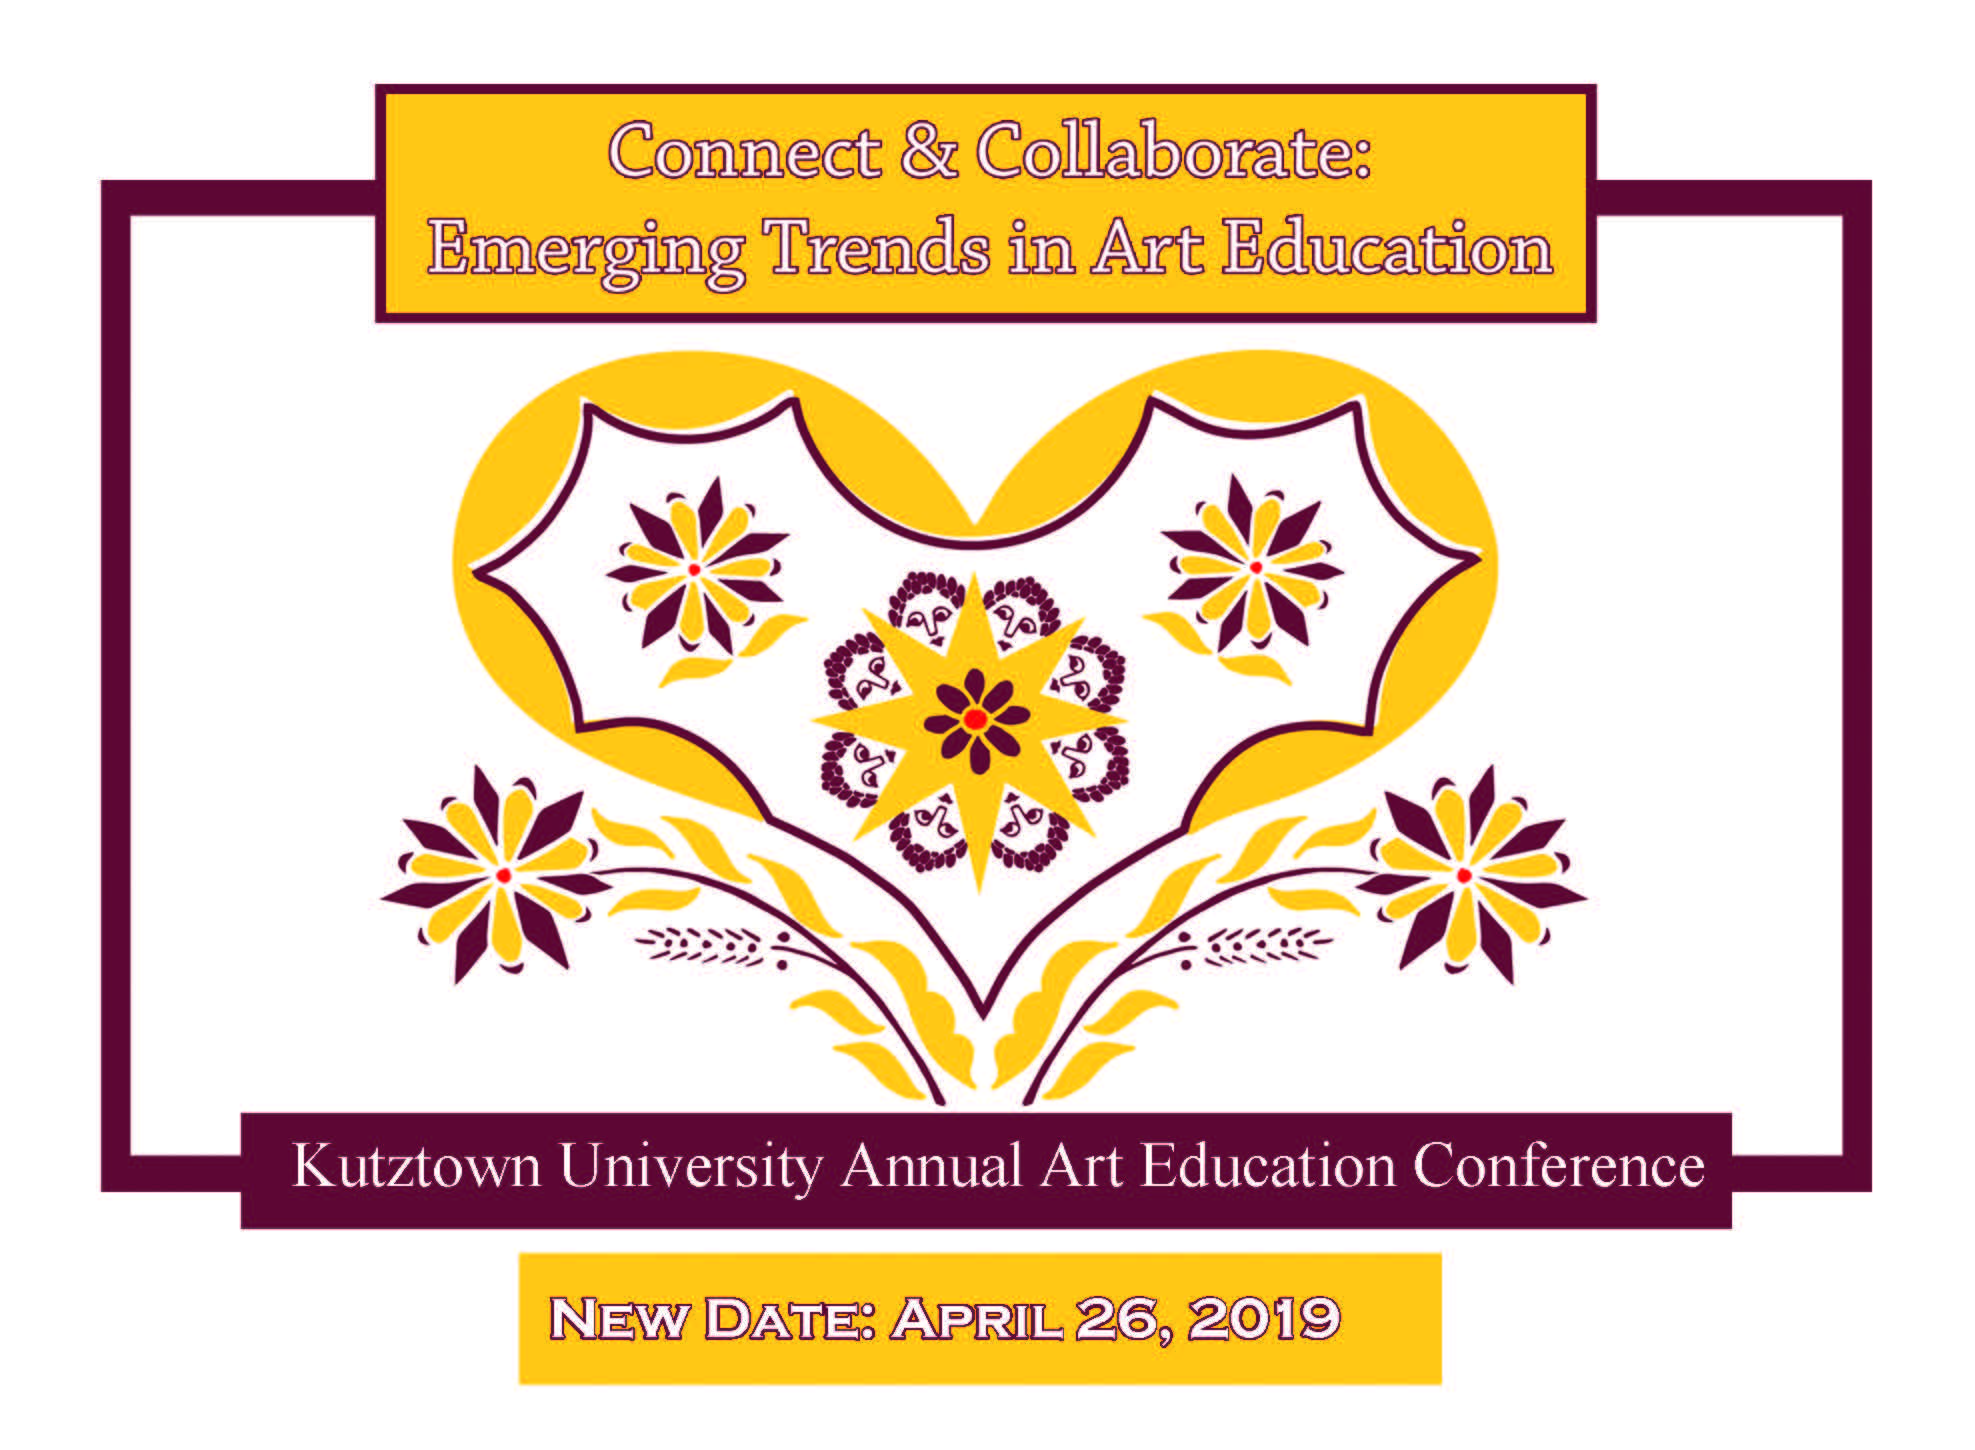 2018-19 annual Art Education Conference Postcard/ "Connect & collaborate: emerging trends in art education."